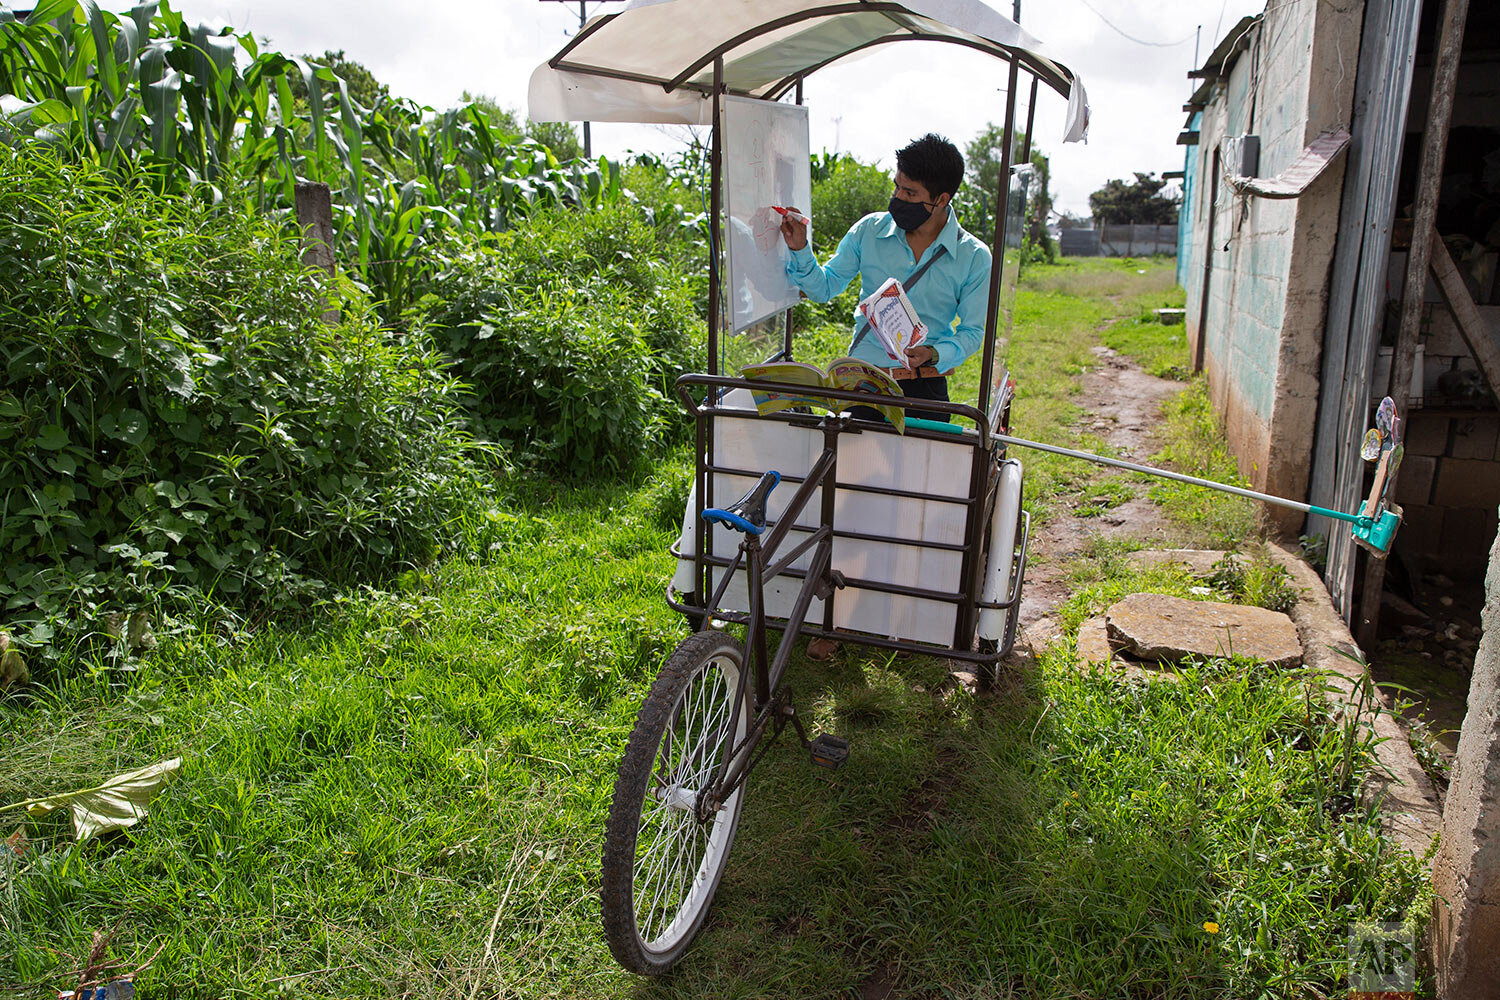  Teacher Gerardo Ixcoy conducts a math class from a secondhand, adult tricycle that he converted into a mobile classroom, in Santa Cruz del Quiche, Guatemala, Wednesday, July 15, 2020, amid the new coronavirus pandemic. The 27-year-old teacher deploy